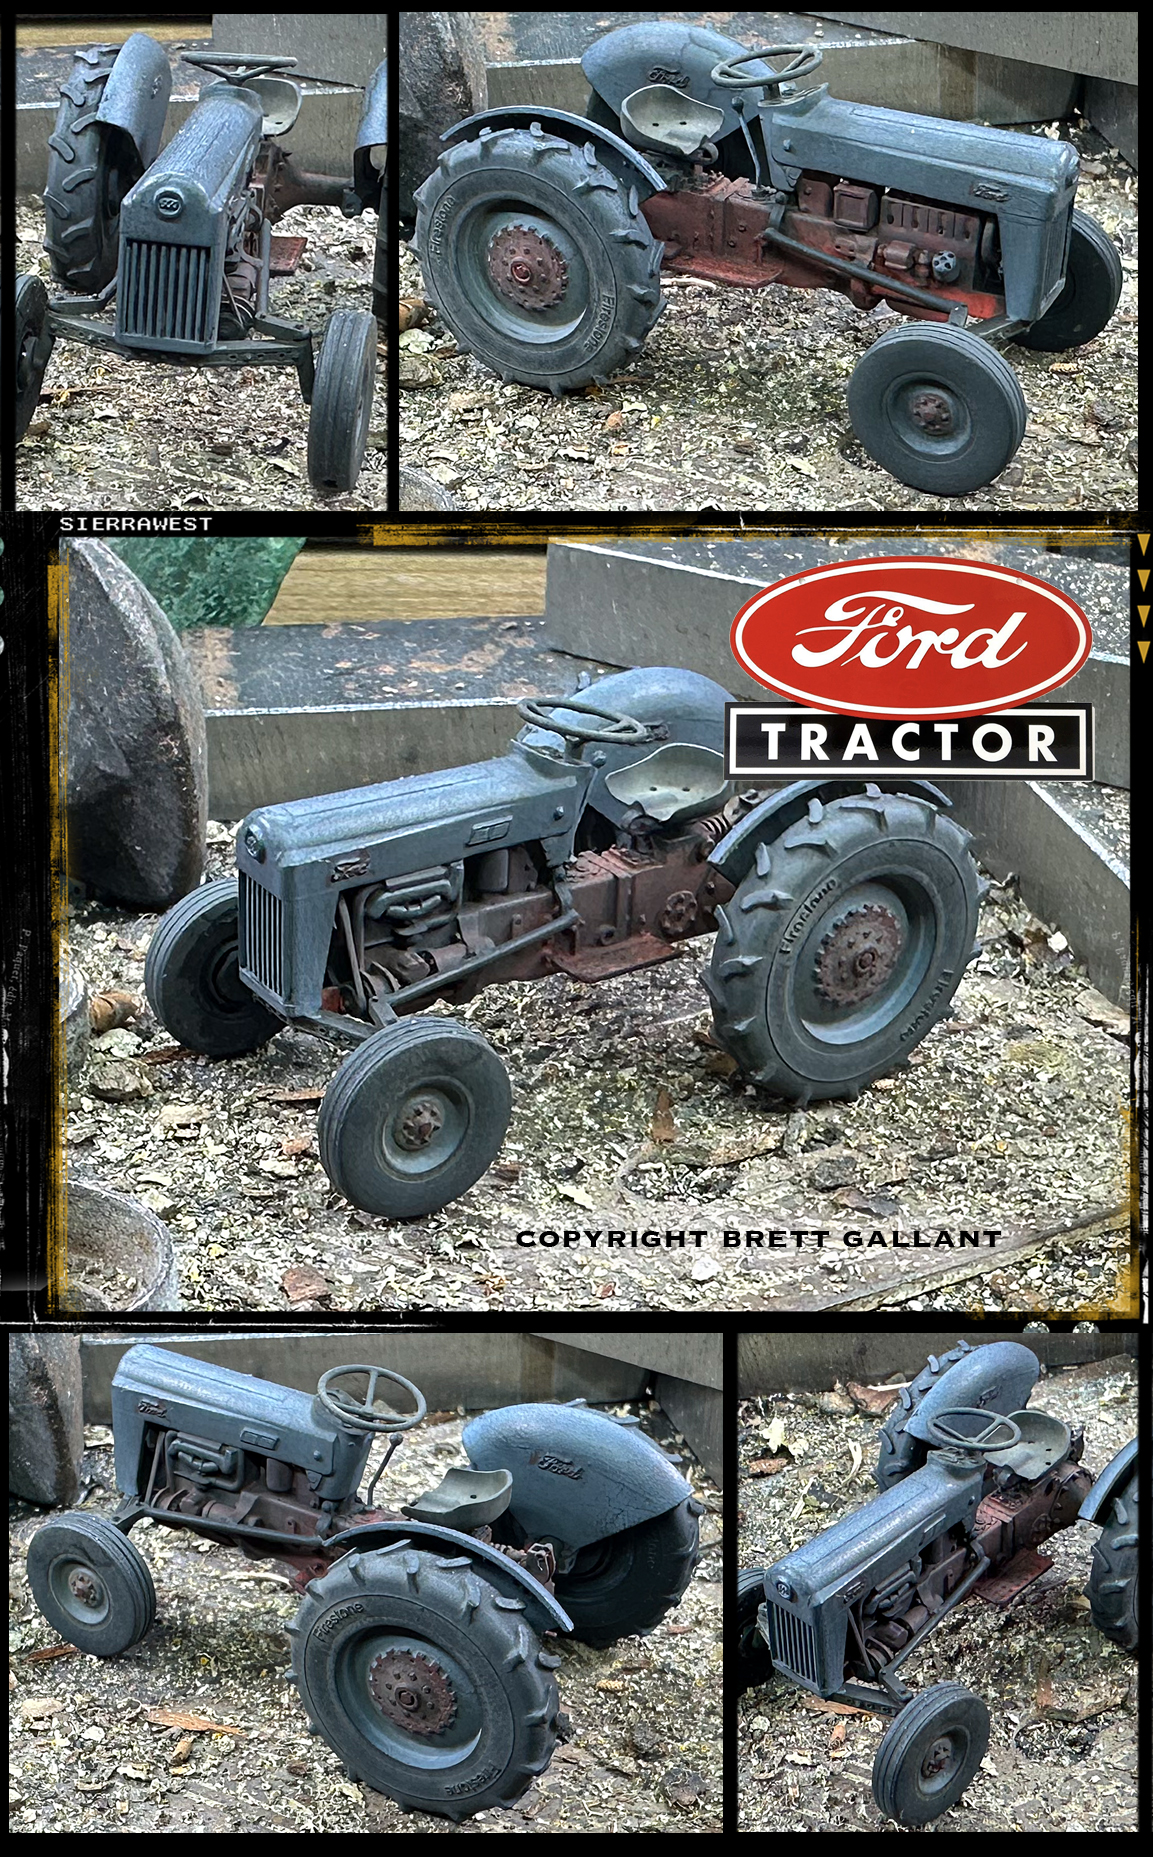 SierraWest Scale Models 3DP Ford Tractor Kit